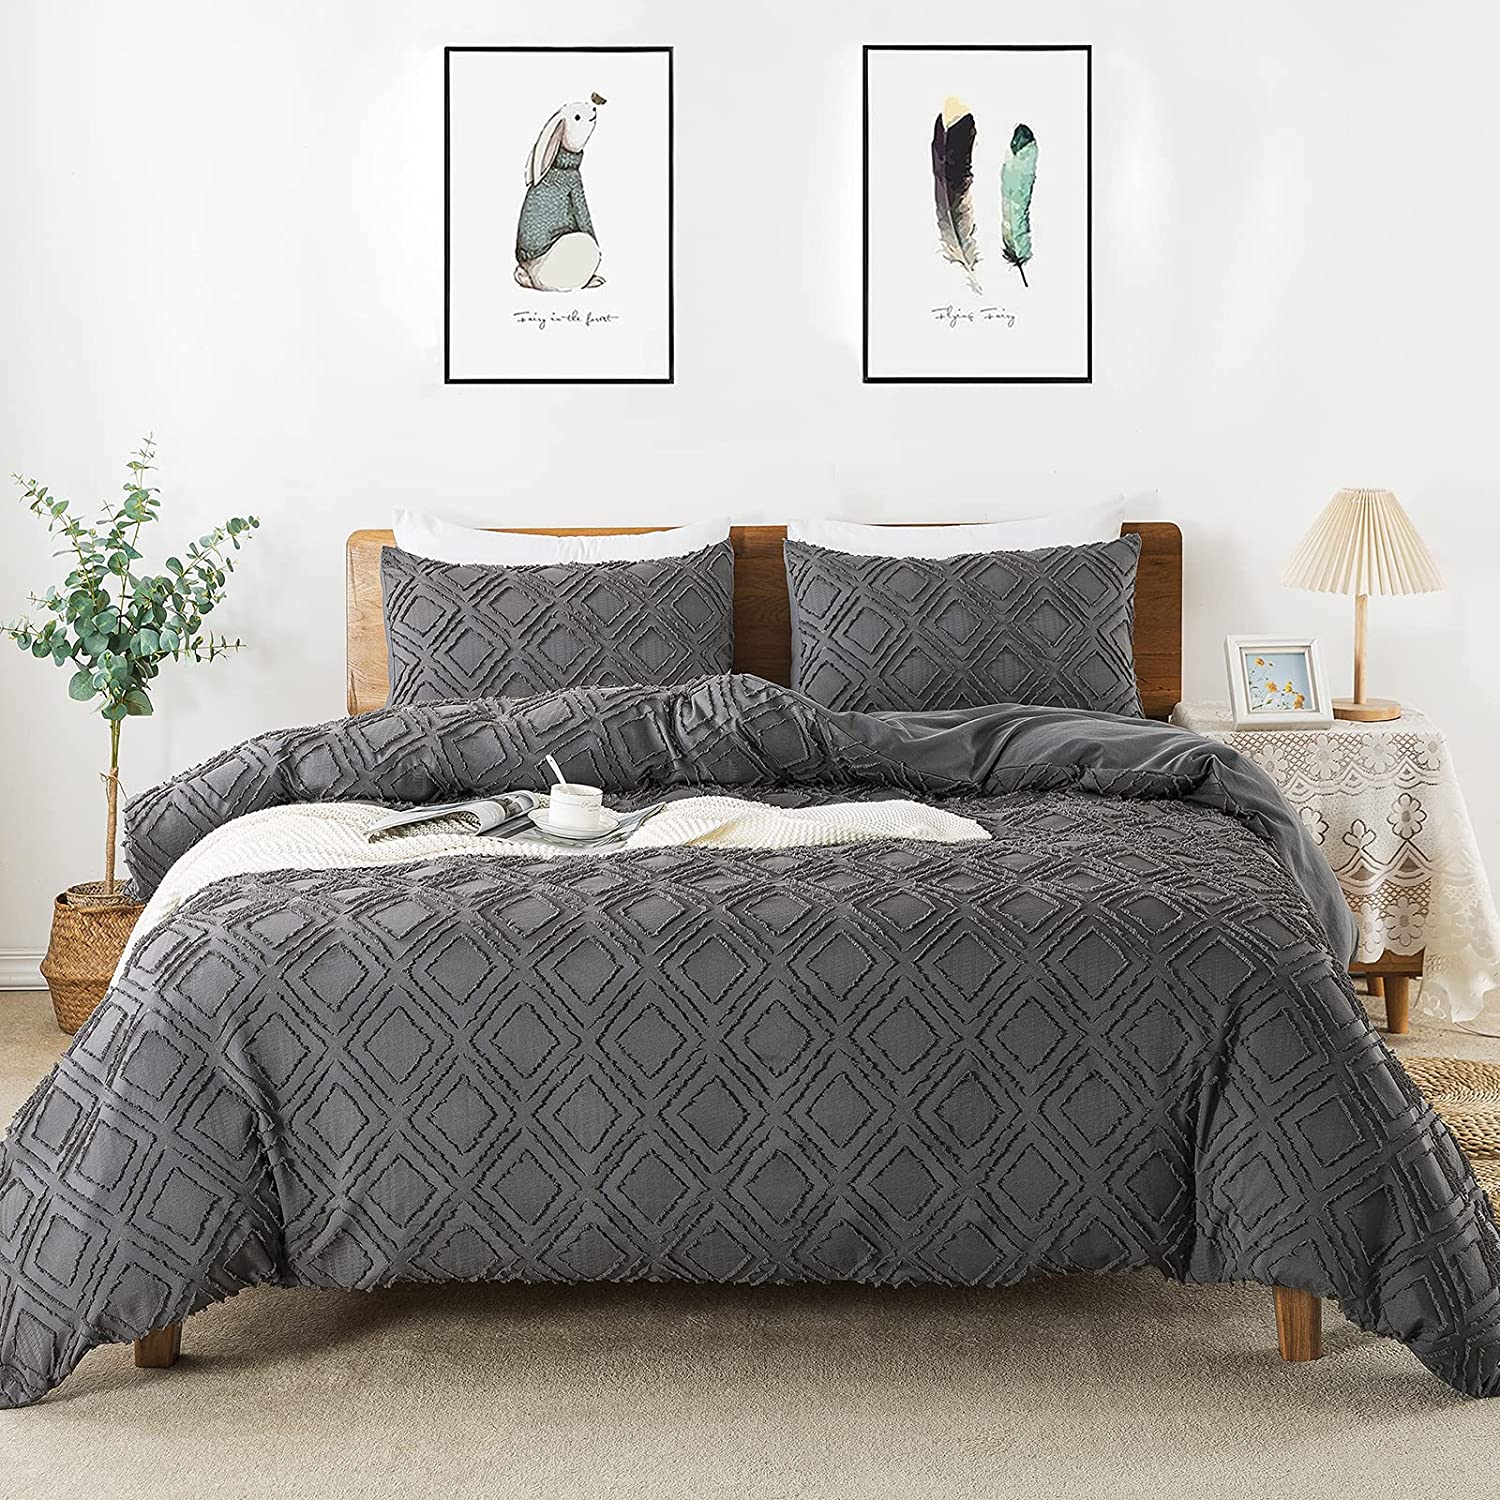 Price:$49.99  Jacquard & Tufted Geometric Grey Duvet Cover Queen Size Bedding Set, Soft, All Seasons, with Double-end Sliders Zipper Closure, 8 Ties, 3 Pieces (2 Pillowcase, 1 Duvet Cover), Q Dark Grey : Home & Kitchen